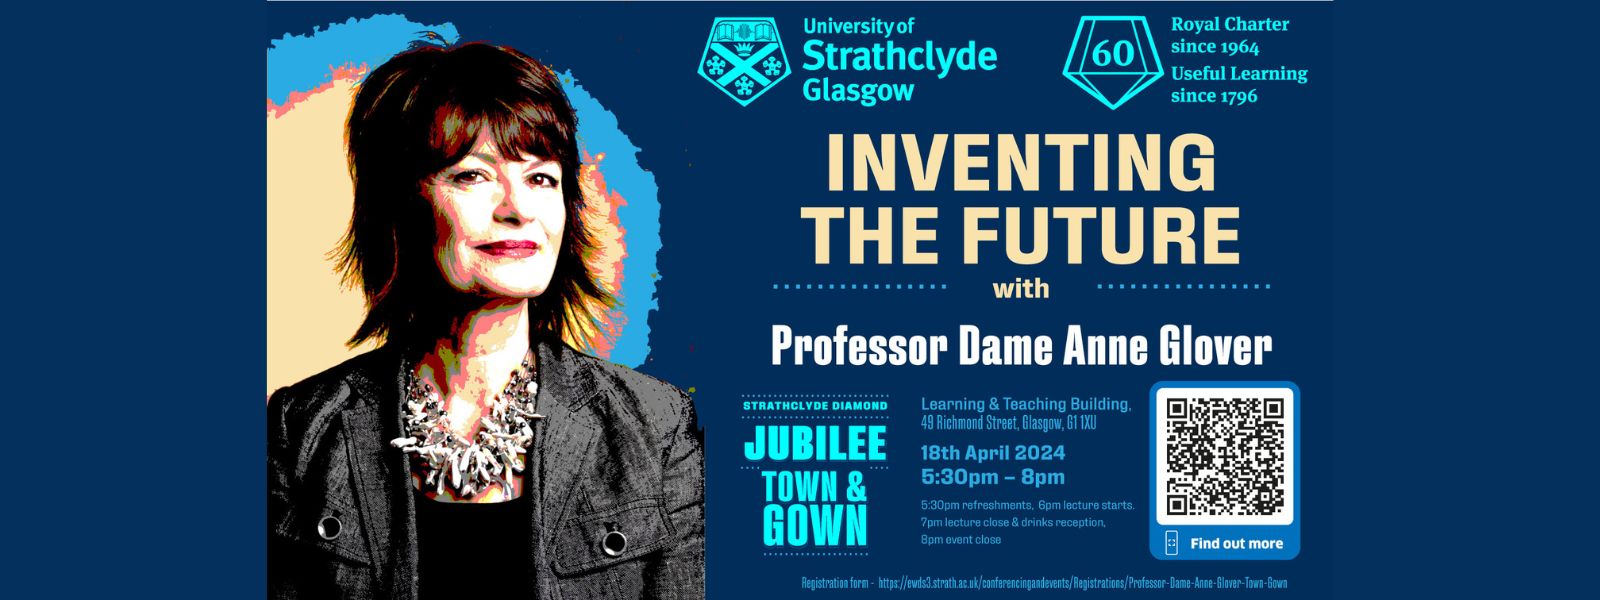 An invitation to Inventing the Future with Professor Dame Anne Glover